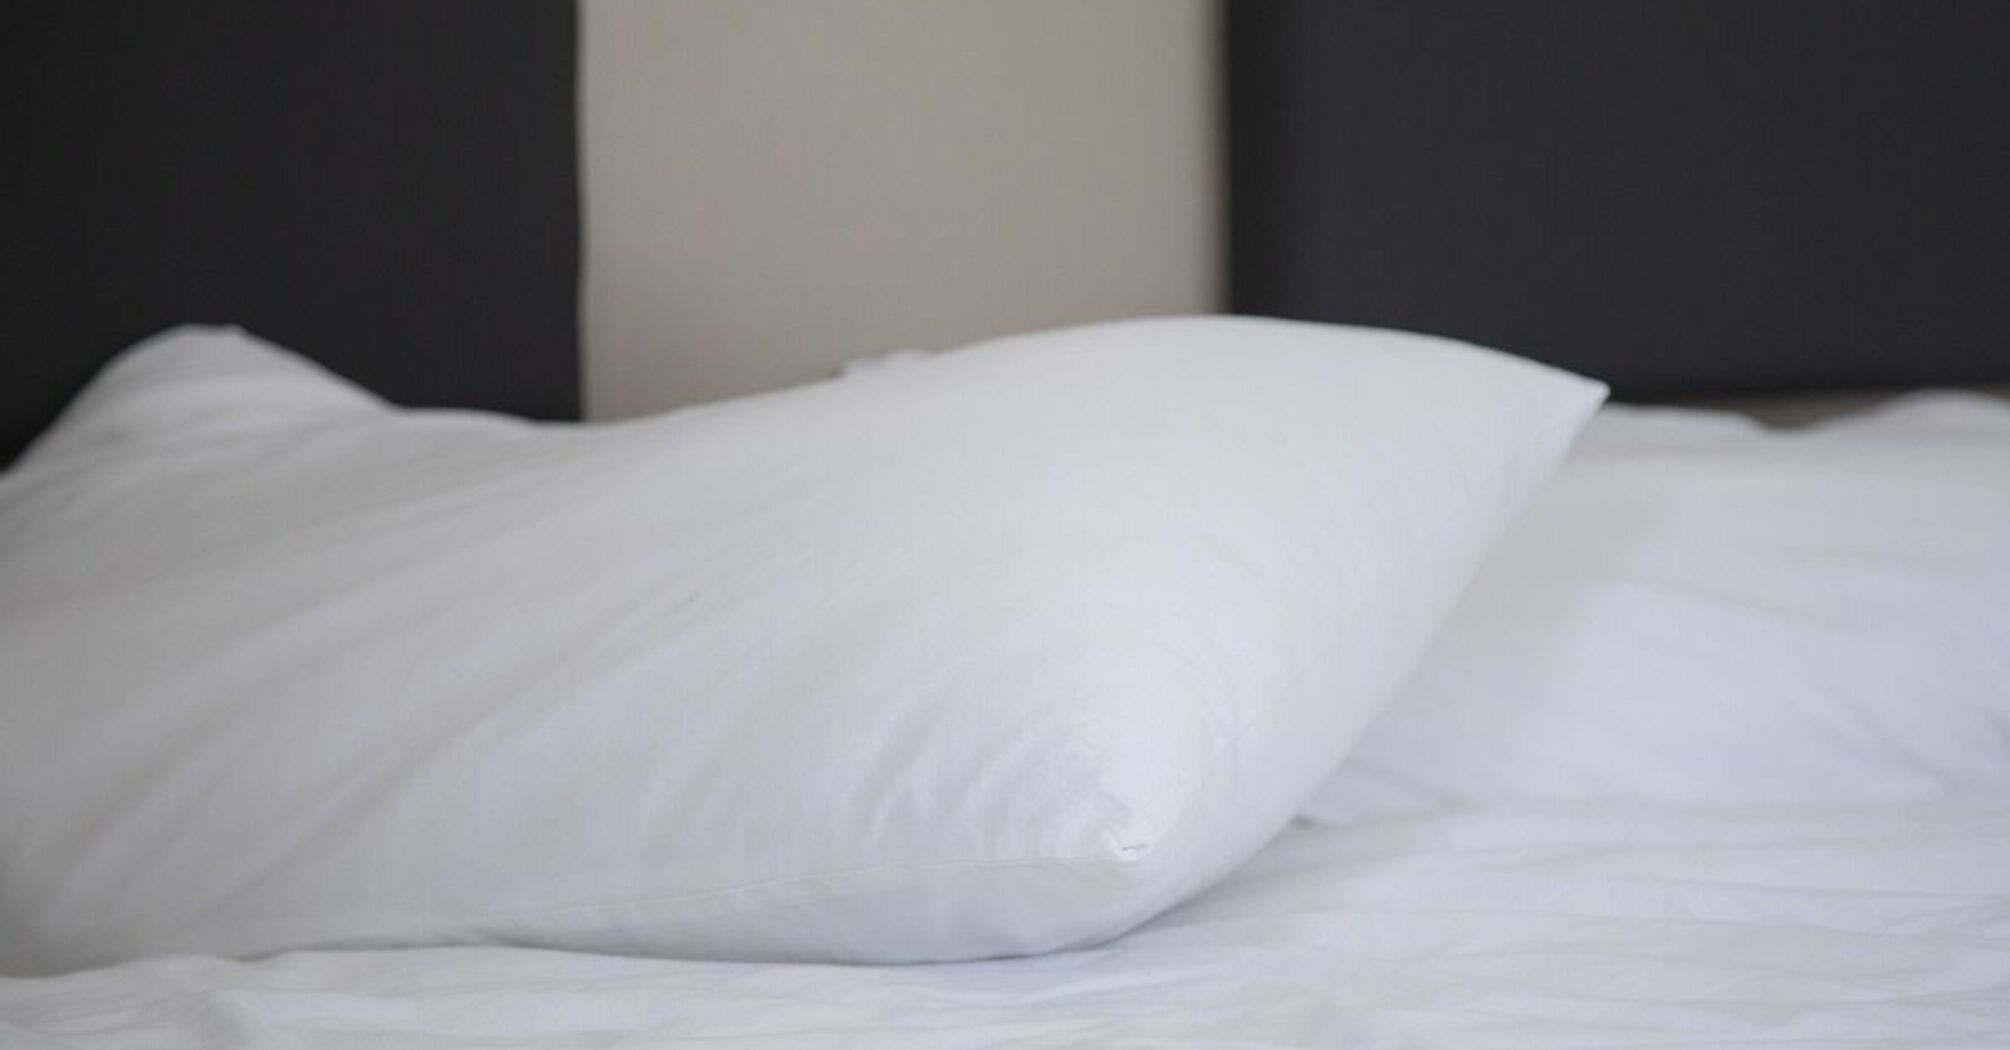 How to make bedding incredibly soft: secrets from experienced housewives